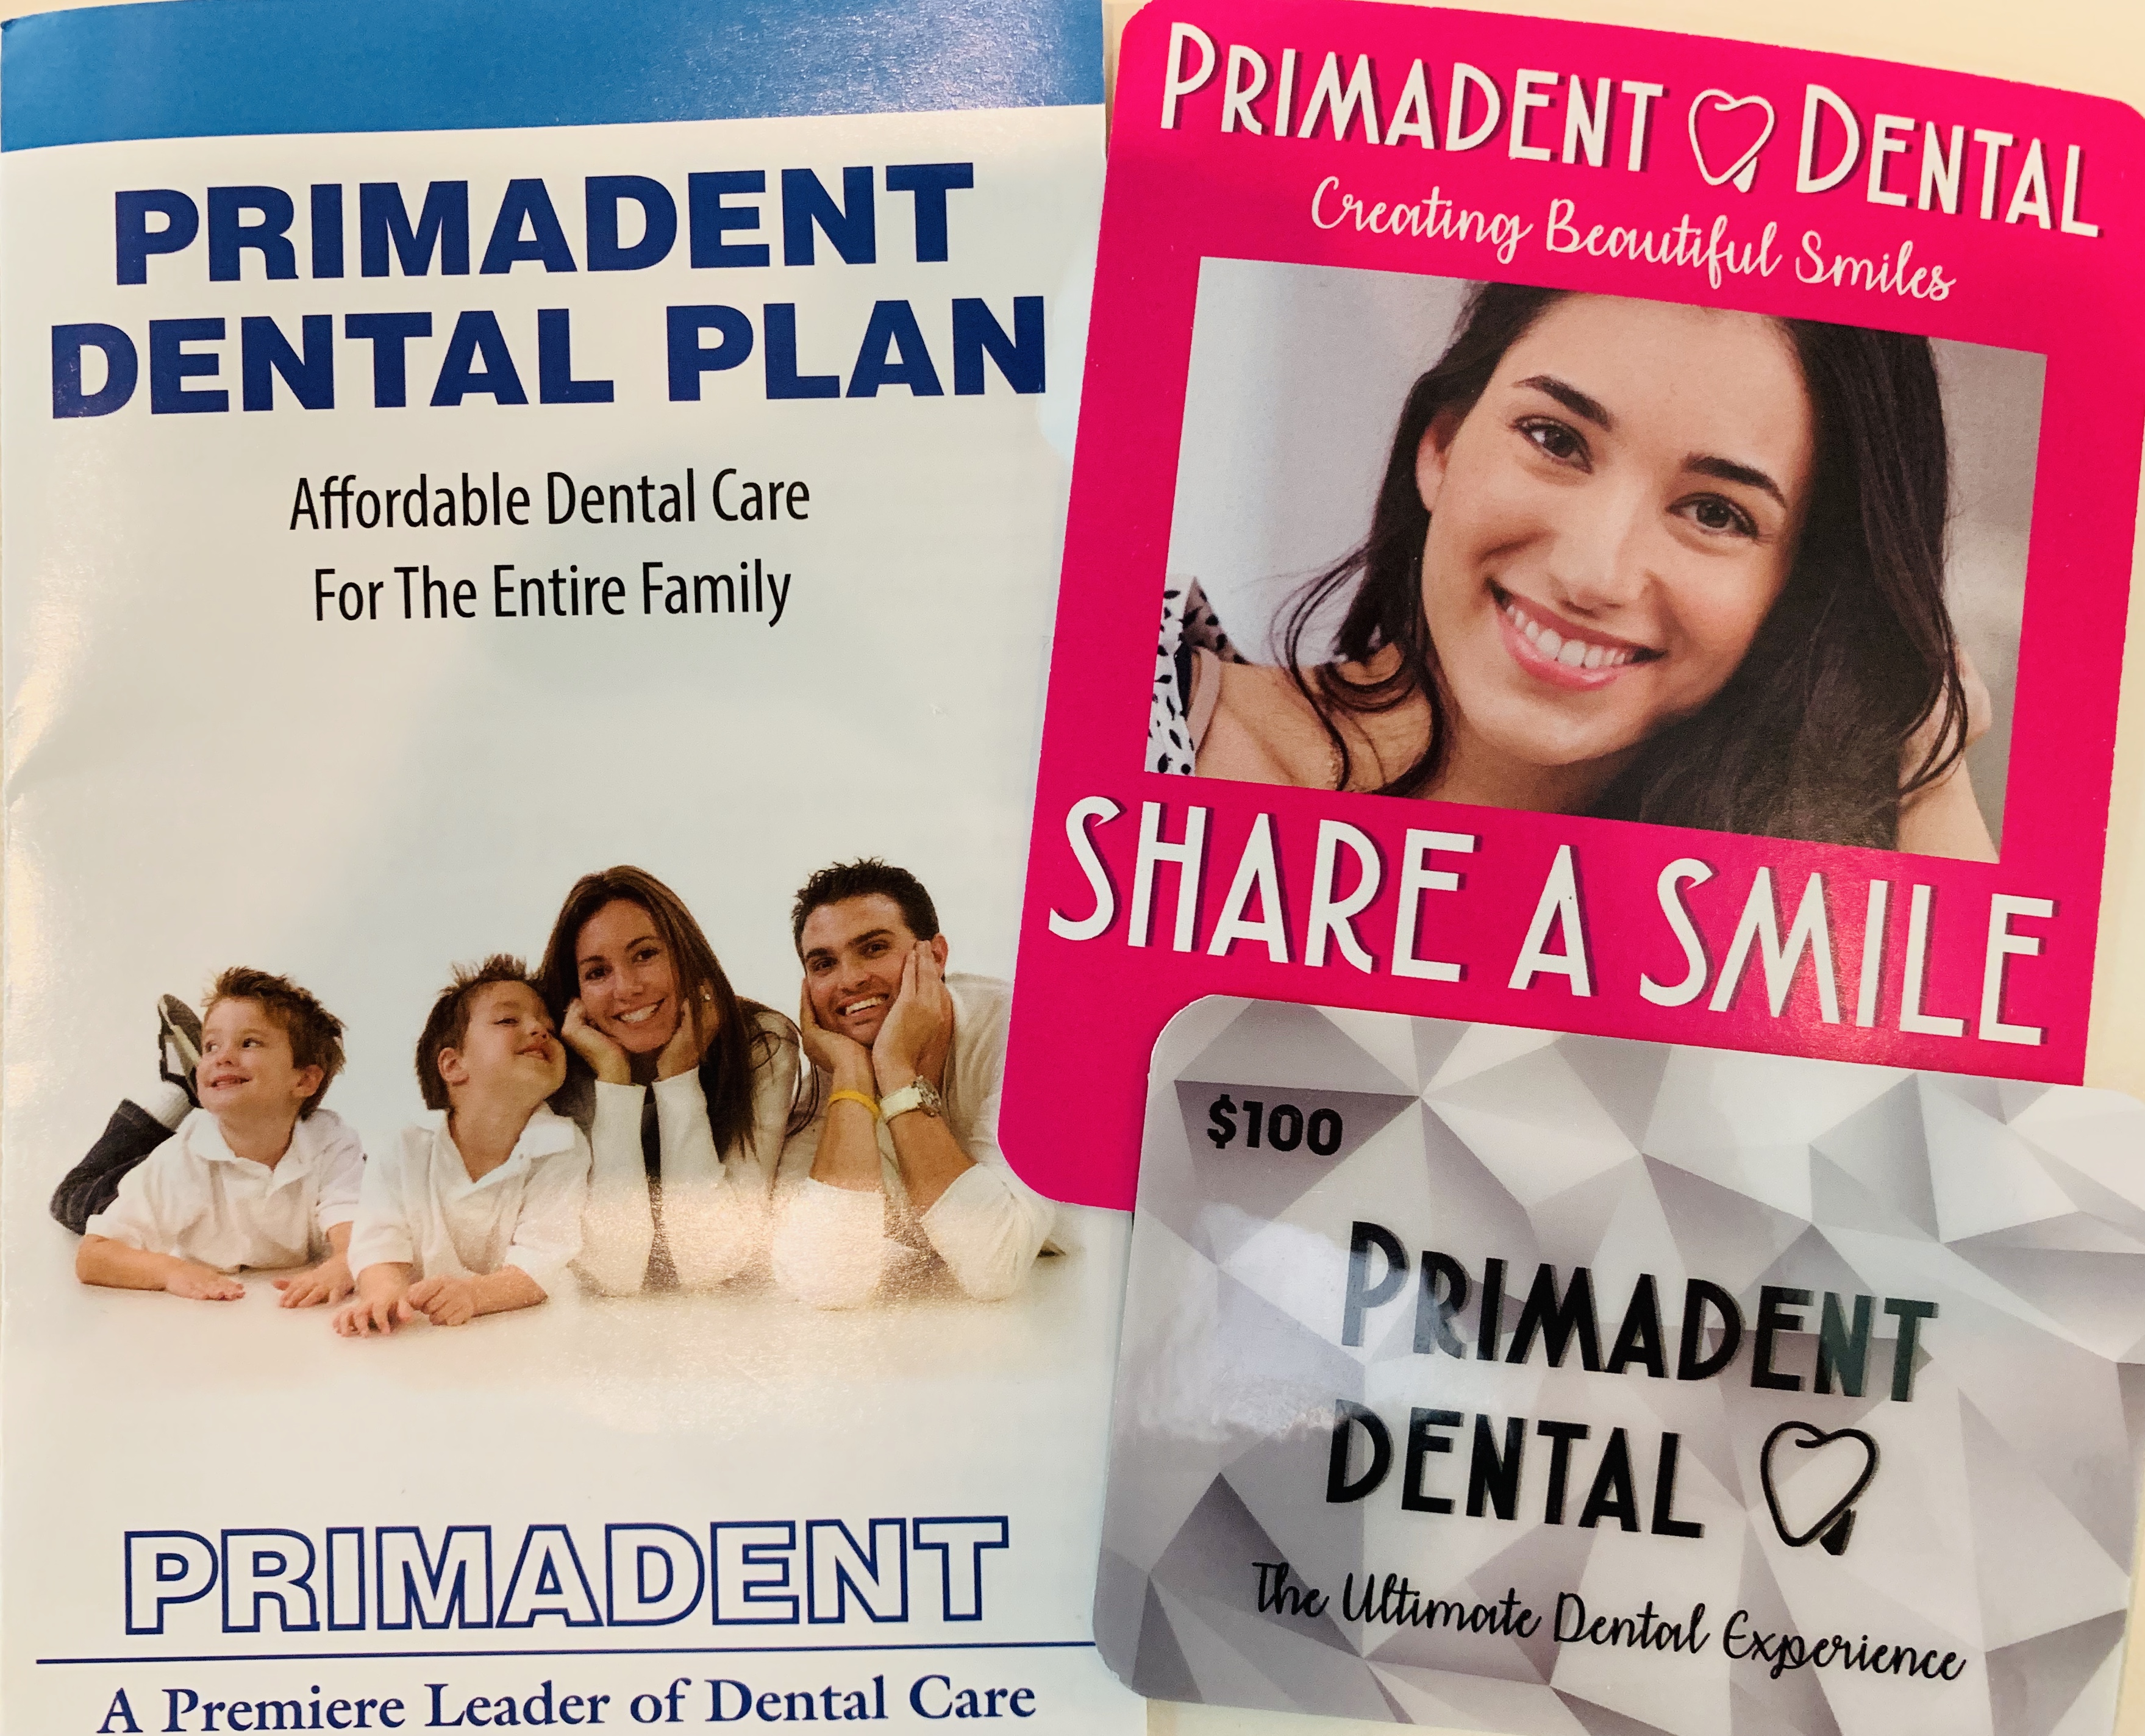 The Ultimate Patient Experience includes Our Priamdent Dental Discount Plan, Share A Smile Program and Primadent Gift Cards.